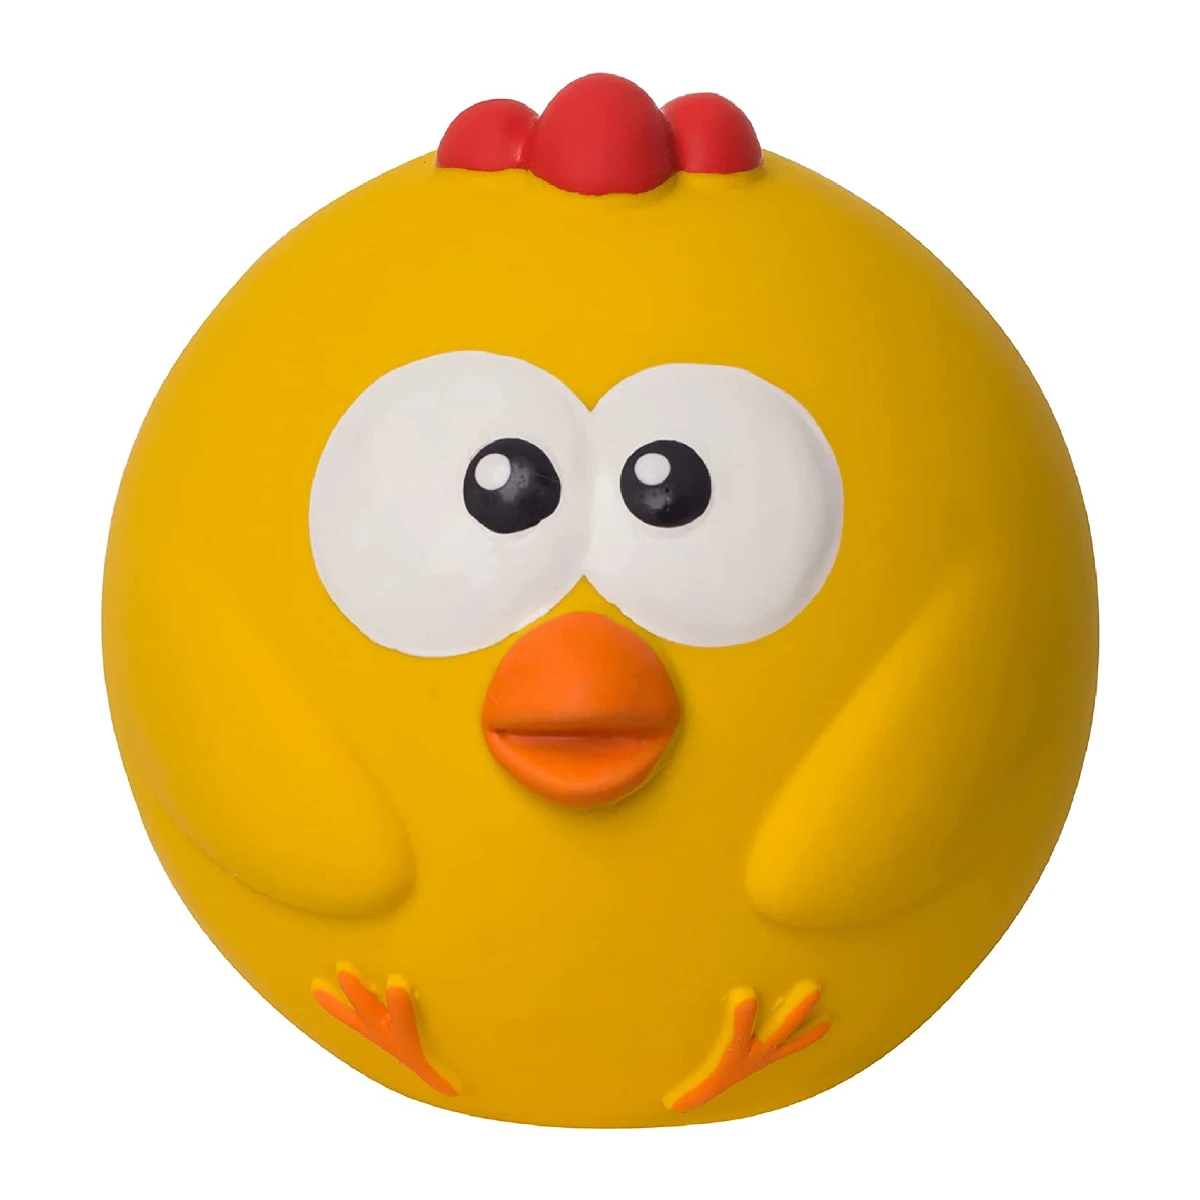 Outward Hound Sillyz Squeaky Latex Ball Dog Toy - Chick